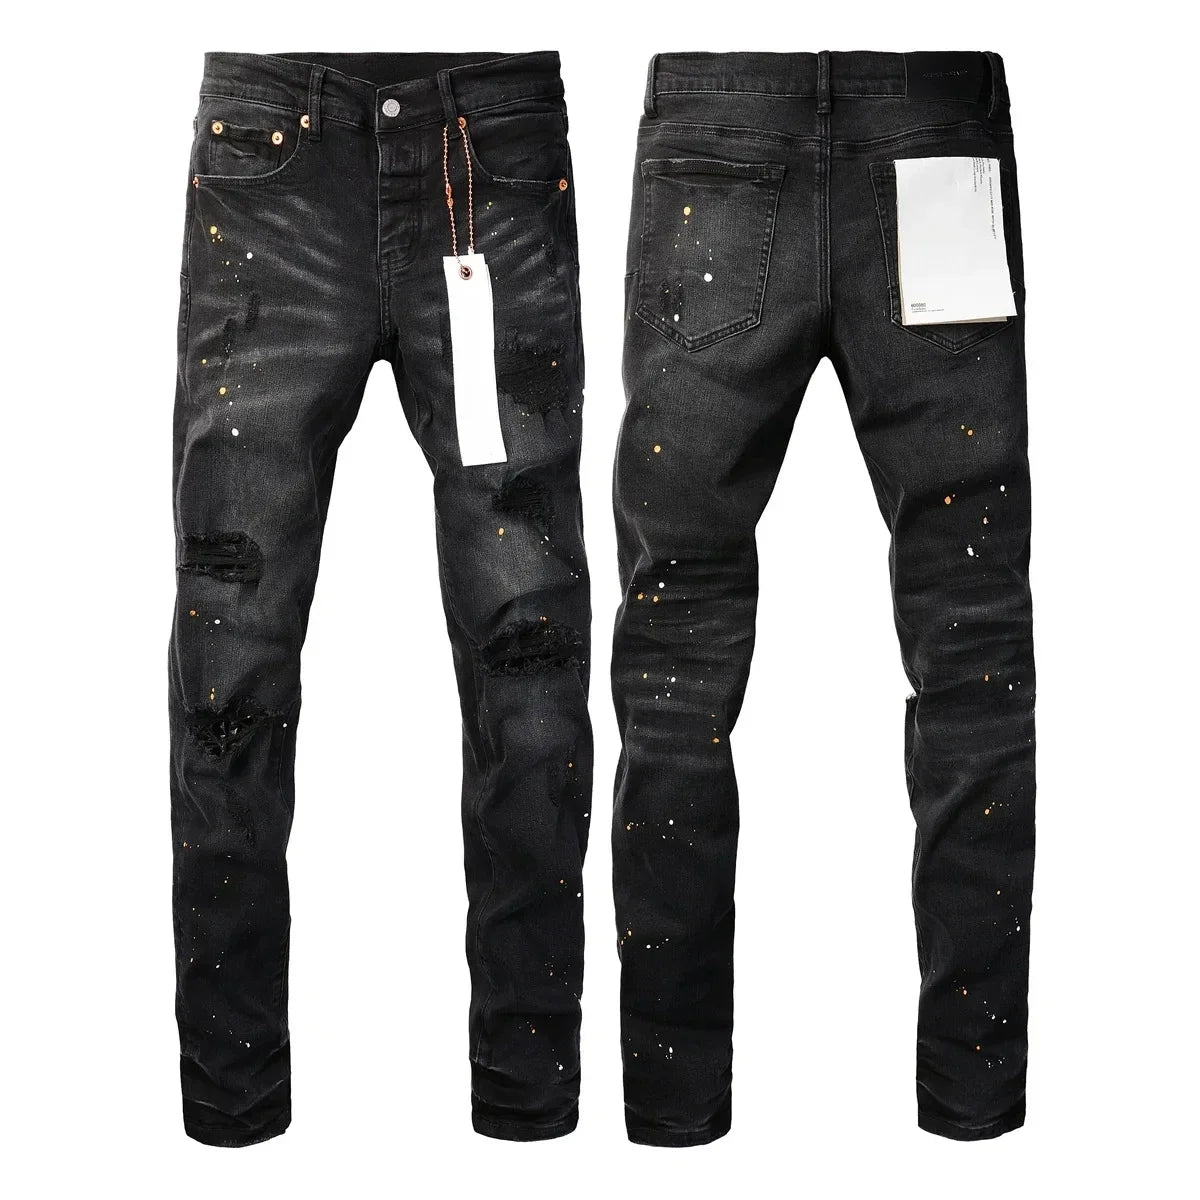 Top quality Purple ROCA brand jeans top street paint black, top quality repair, low elevation tight jeans 28-40 size pants